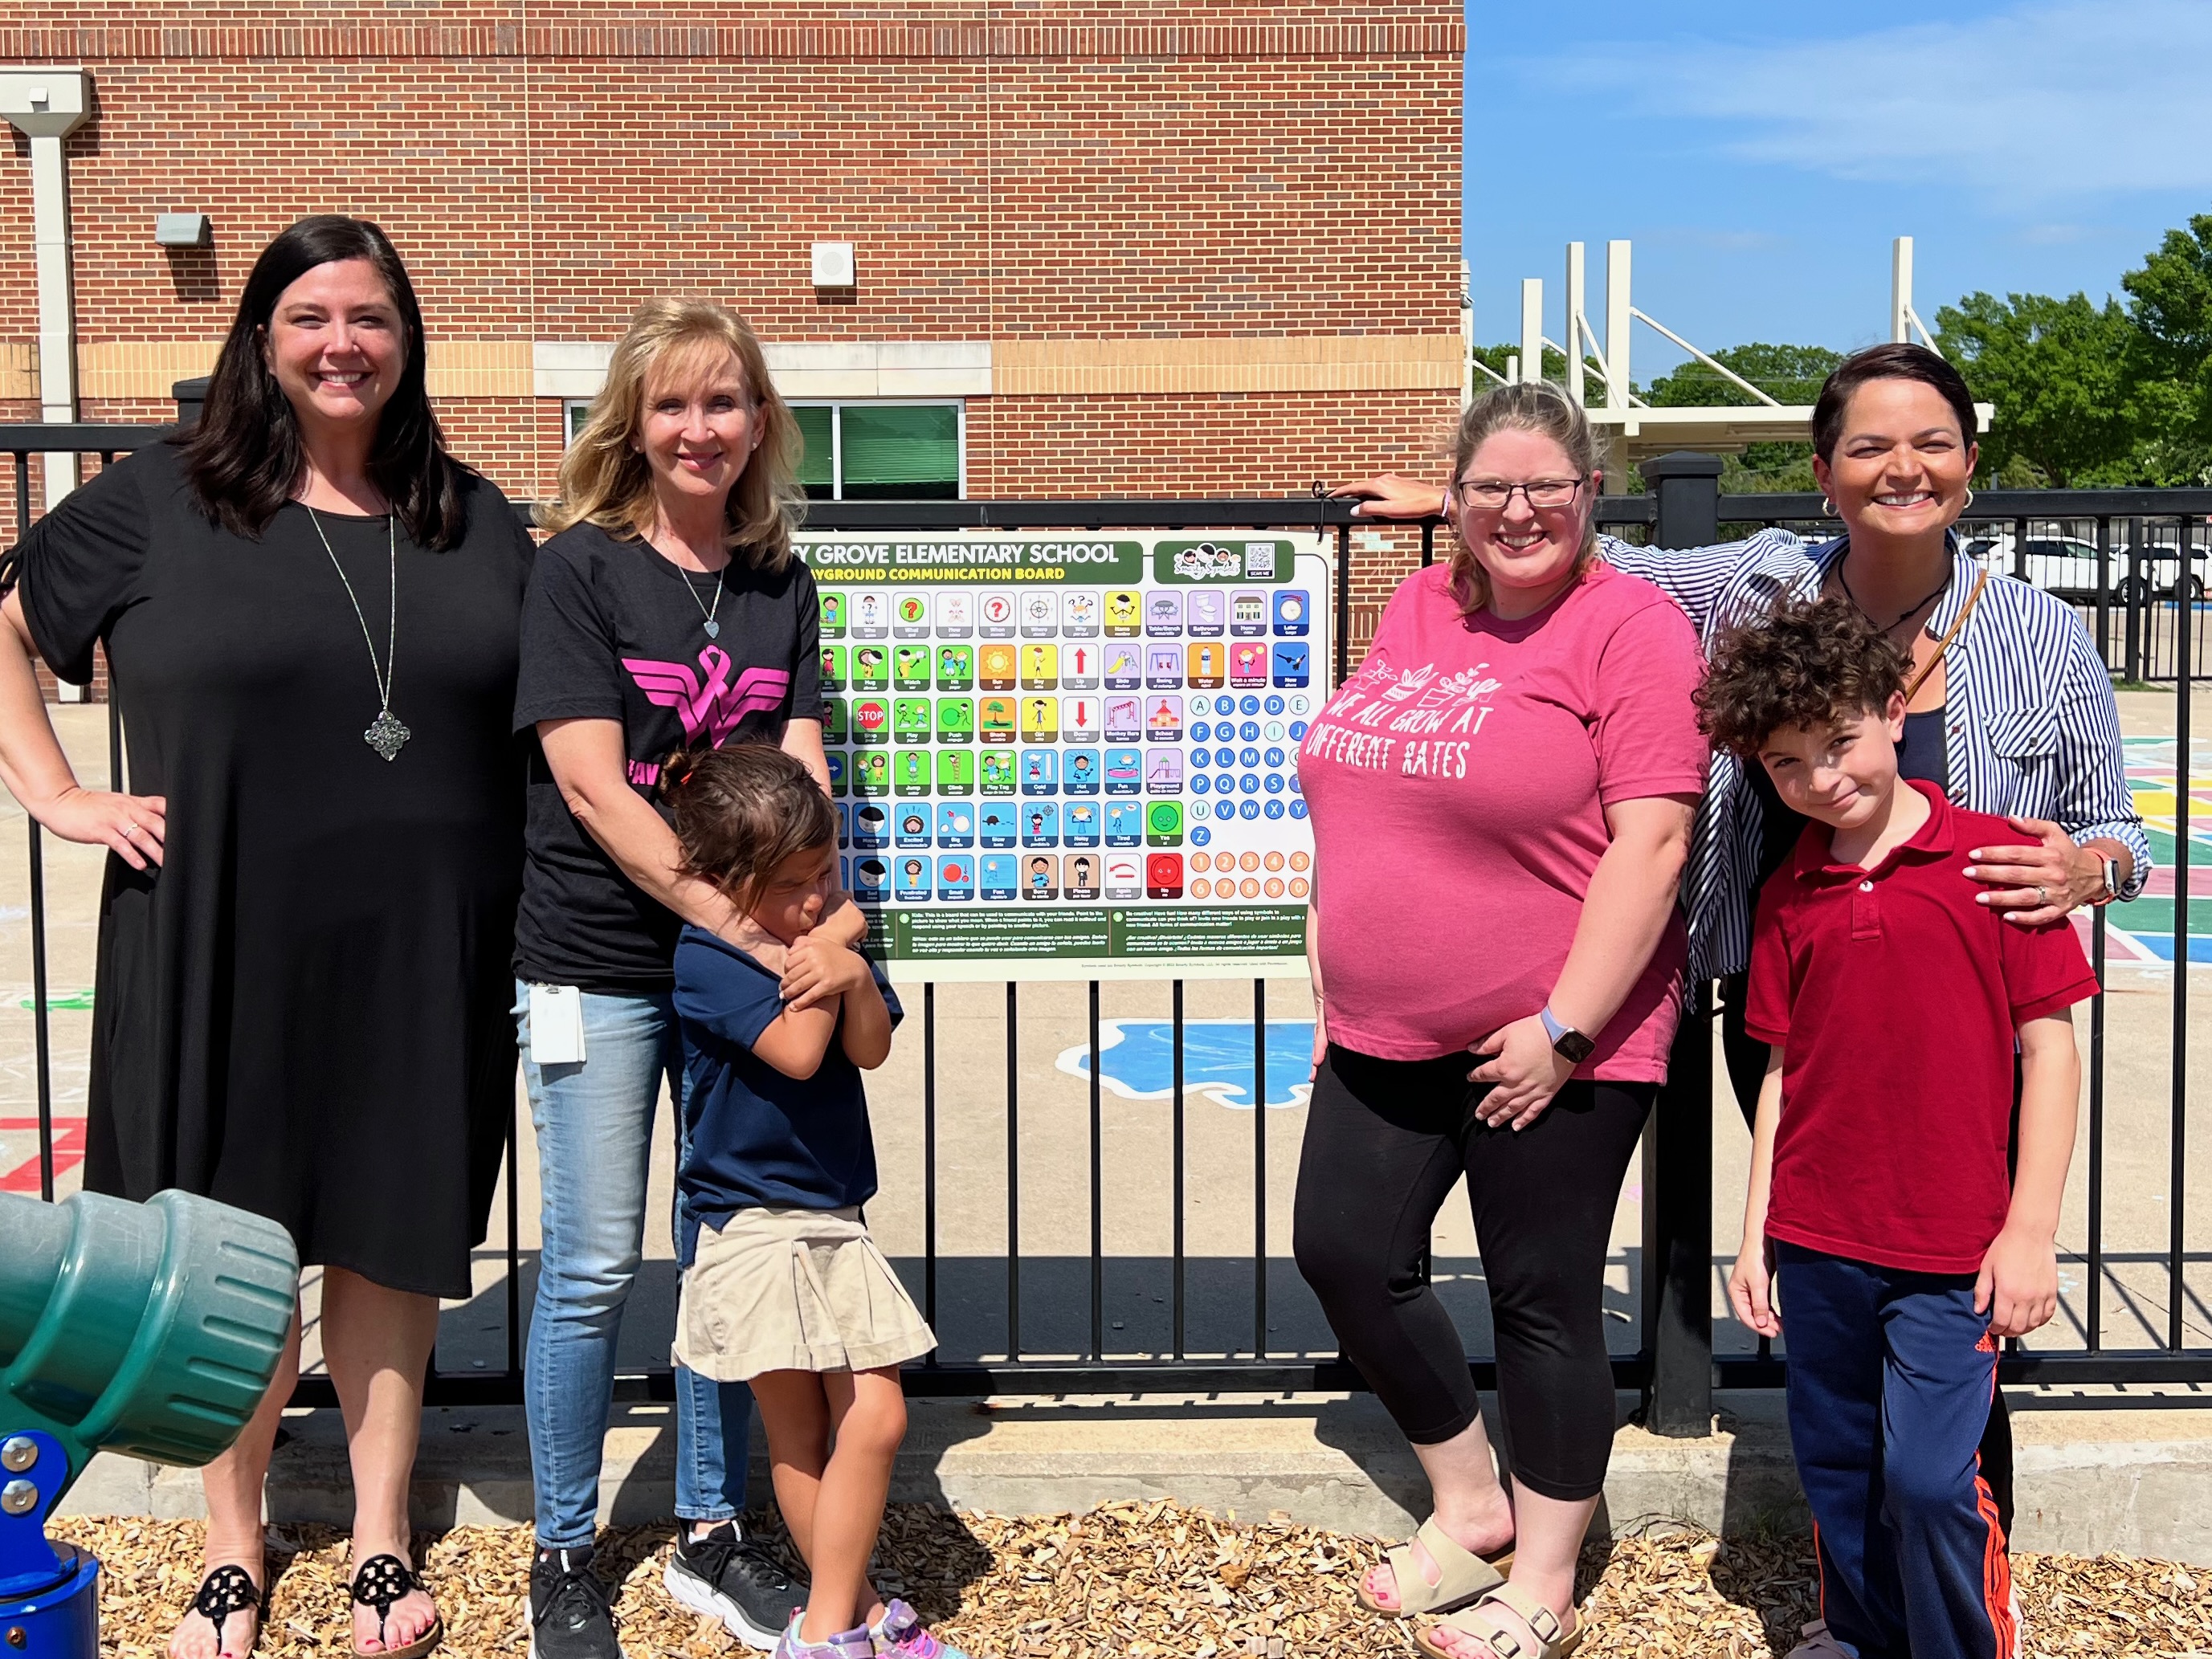 North Texas Siblings Donate Communication Board to Their First School